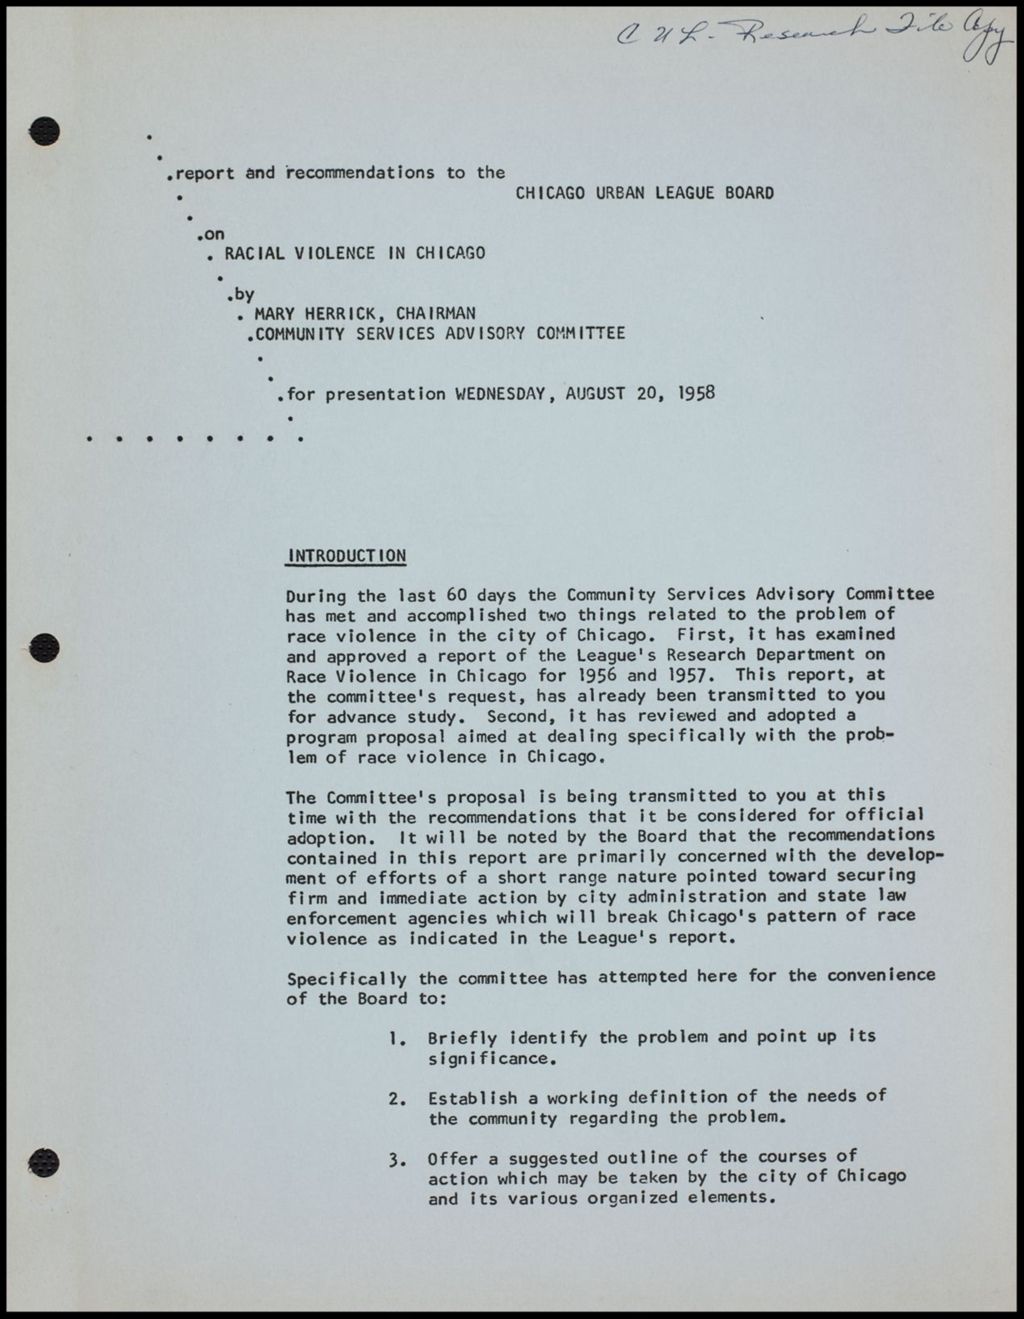 Miniature of Urban League Research Statements and Reports, 1959 (Folder III-2464)